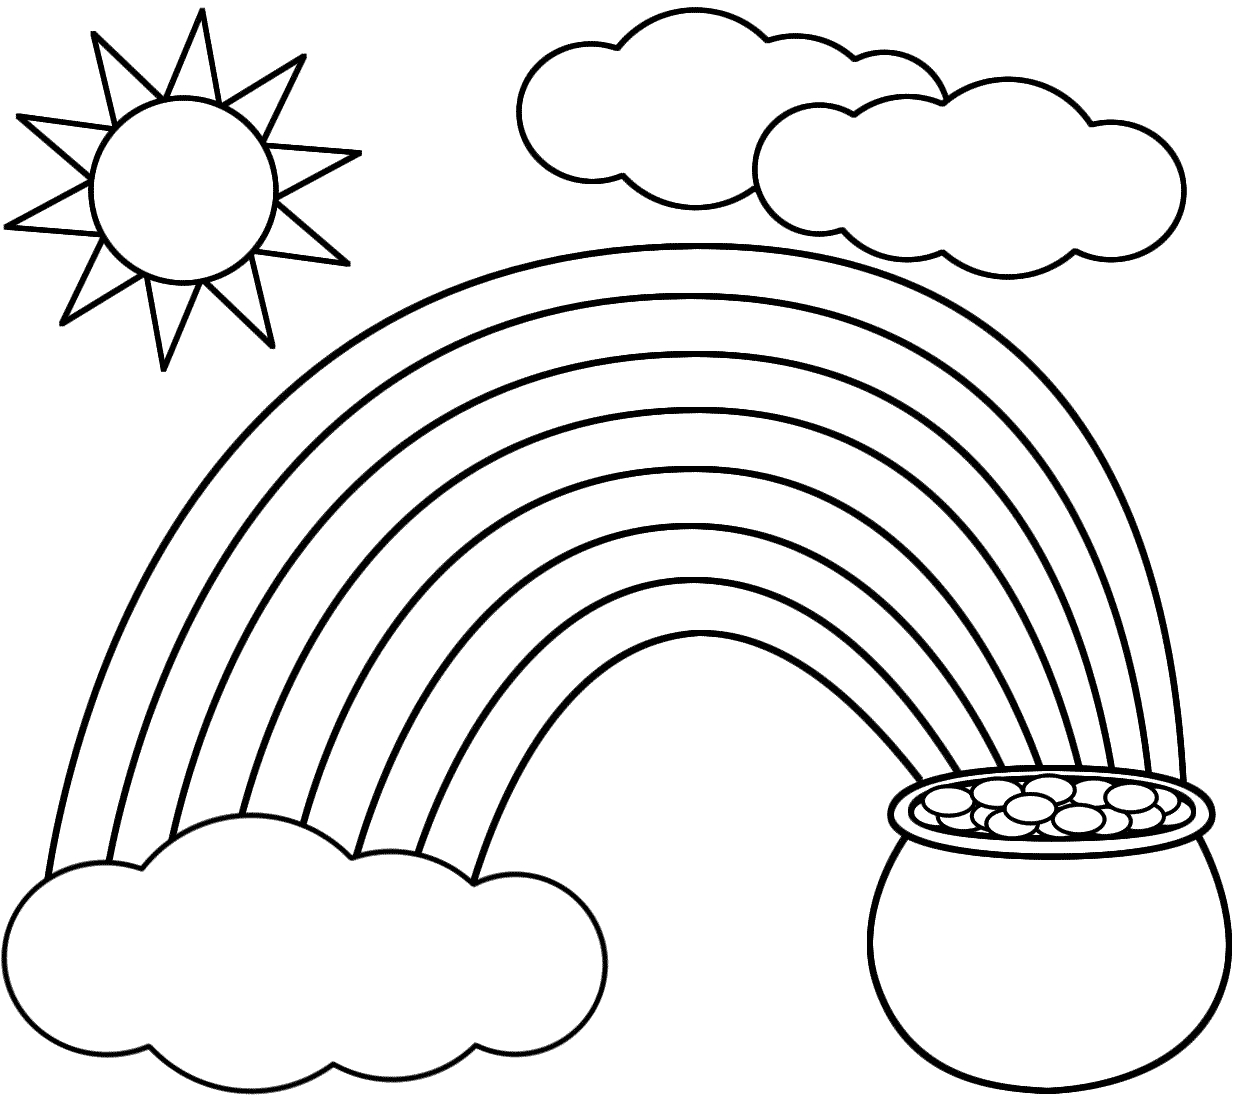 coloring pages rainbow rainbow coloring page kids dream of rainbows with pots coloring rainbow pages 